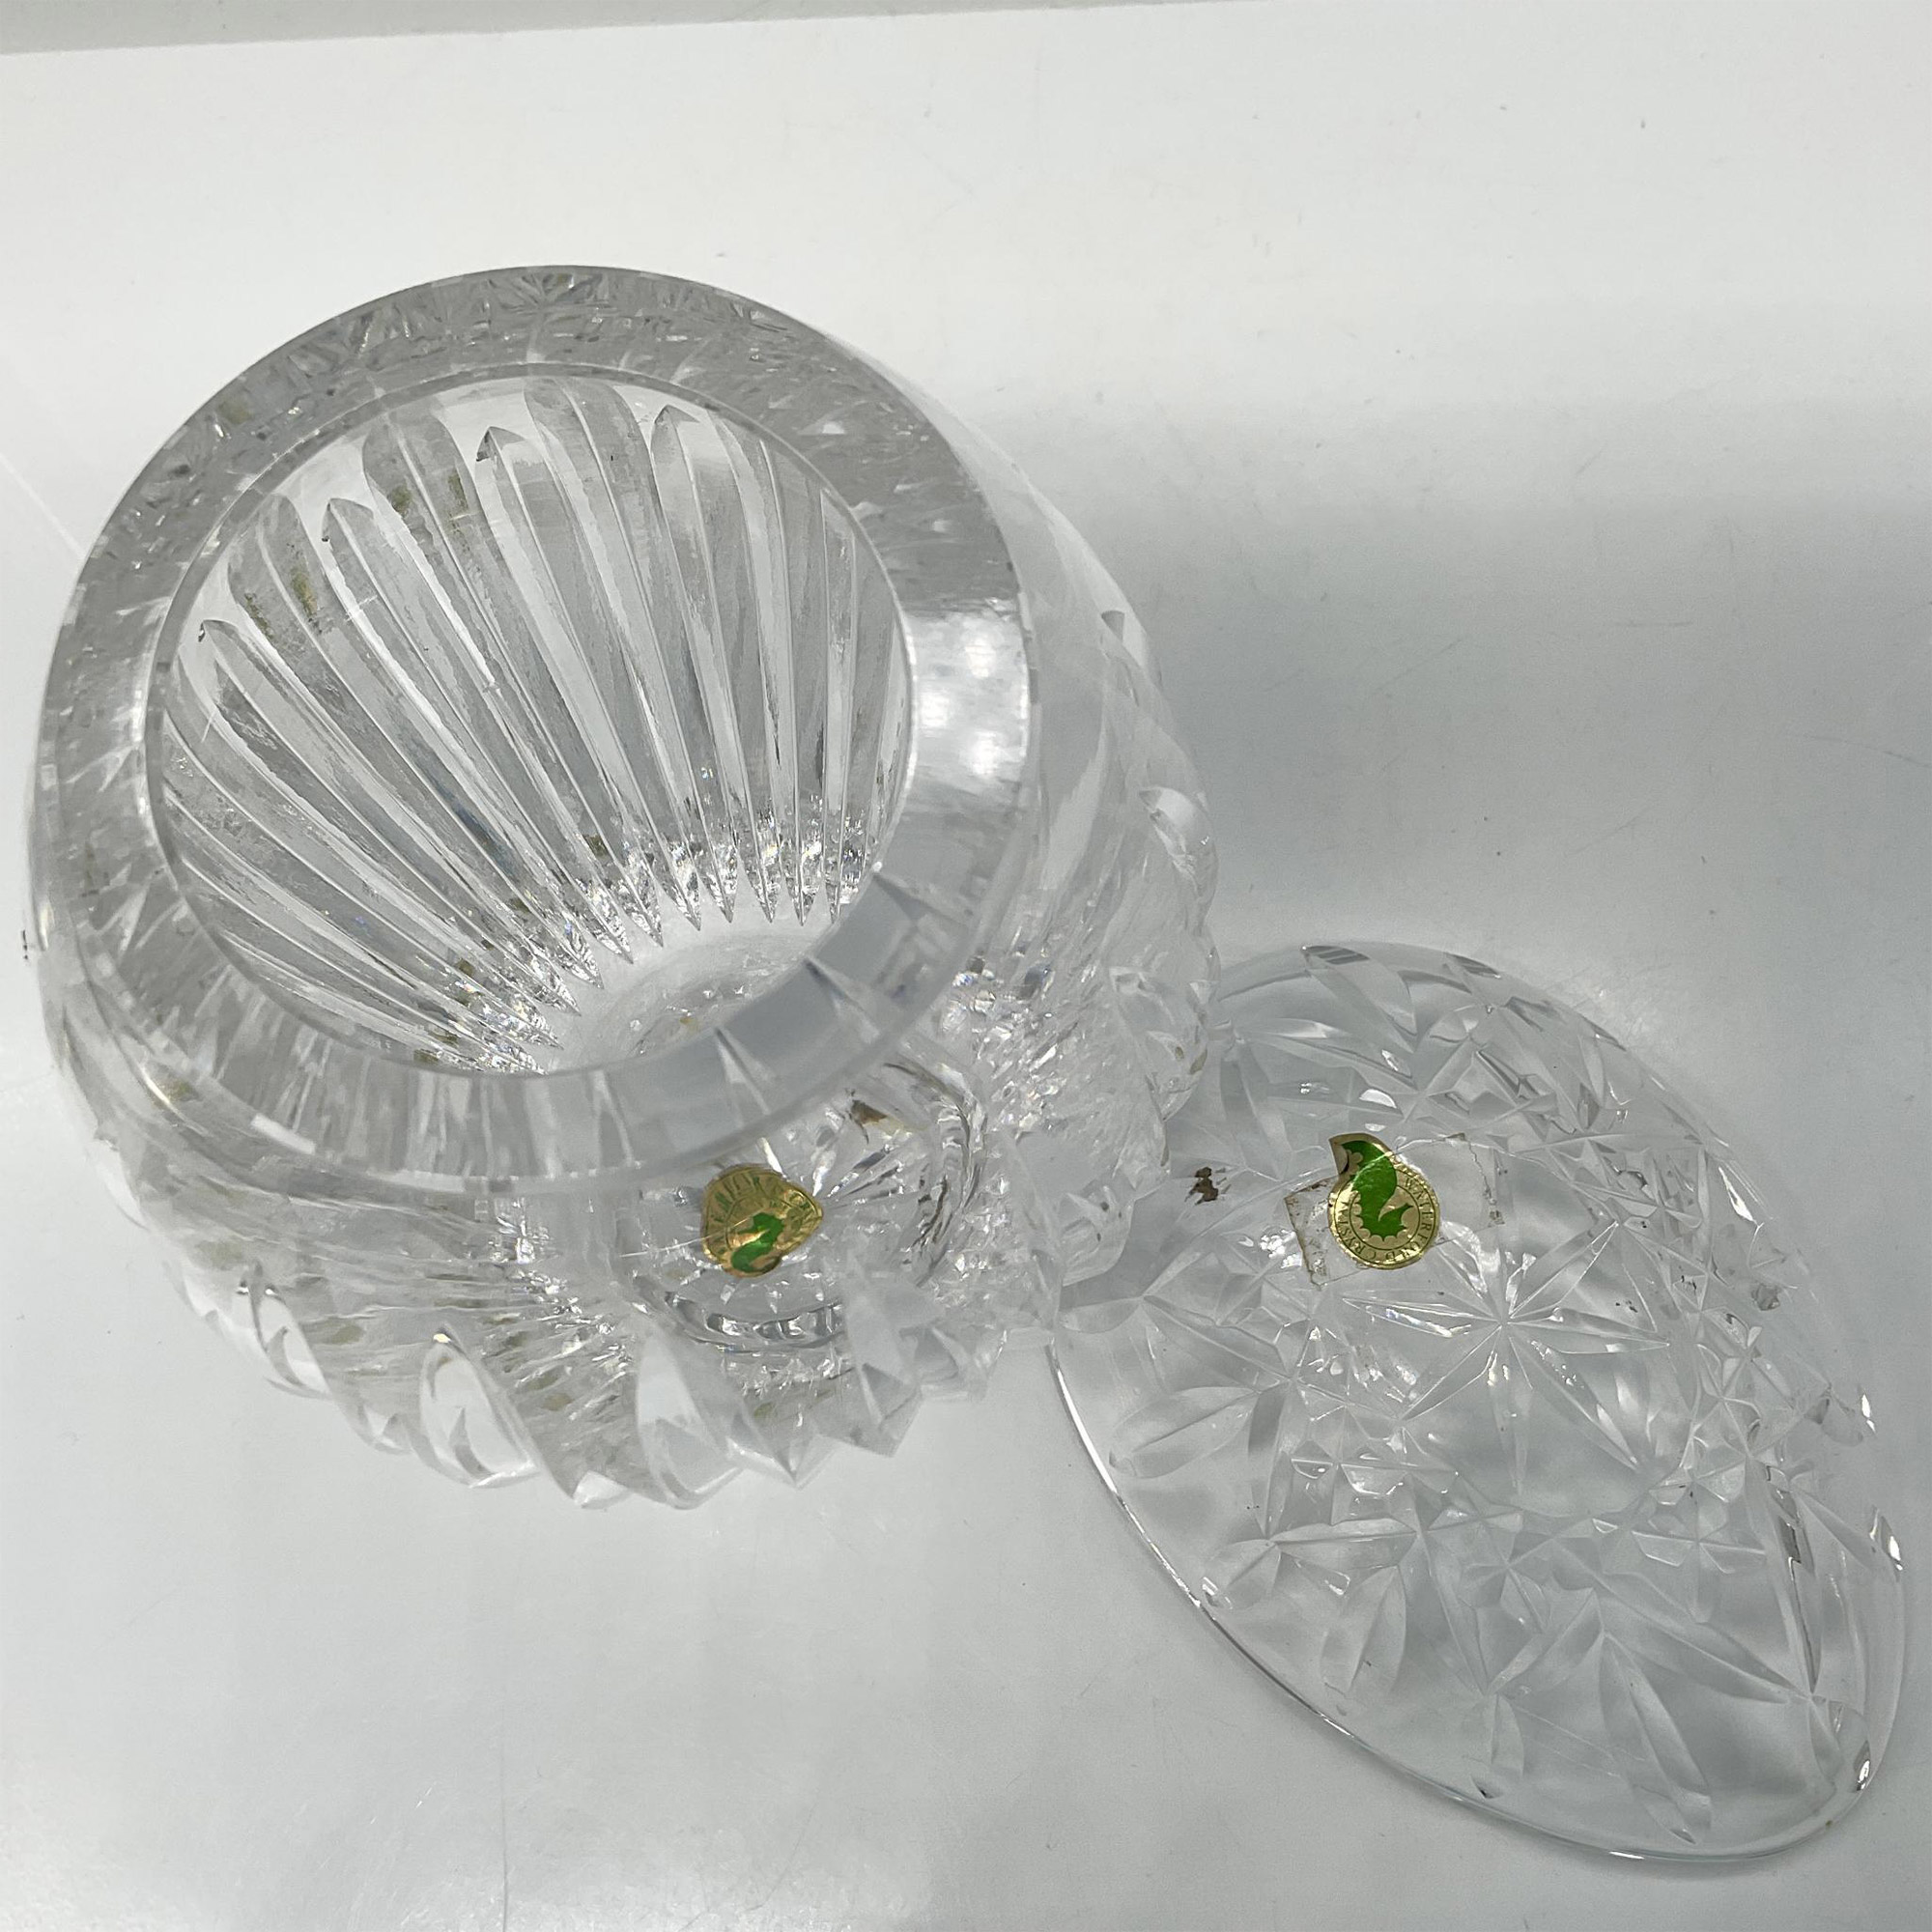 2pc Waterford Crystal Vase and Nut Dish - Image 3 of 3